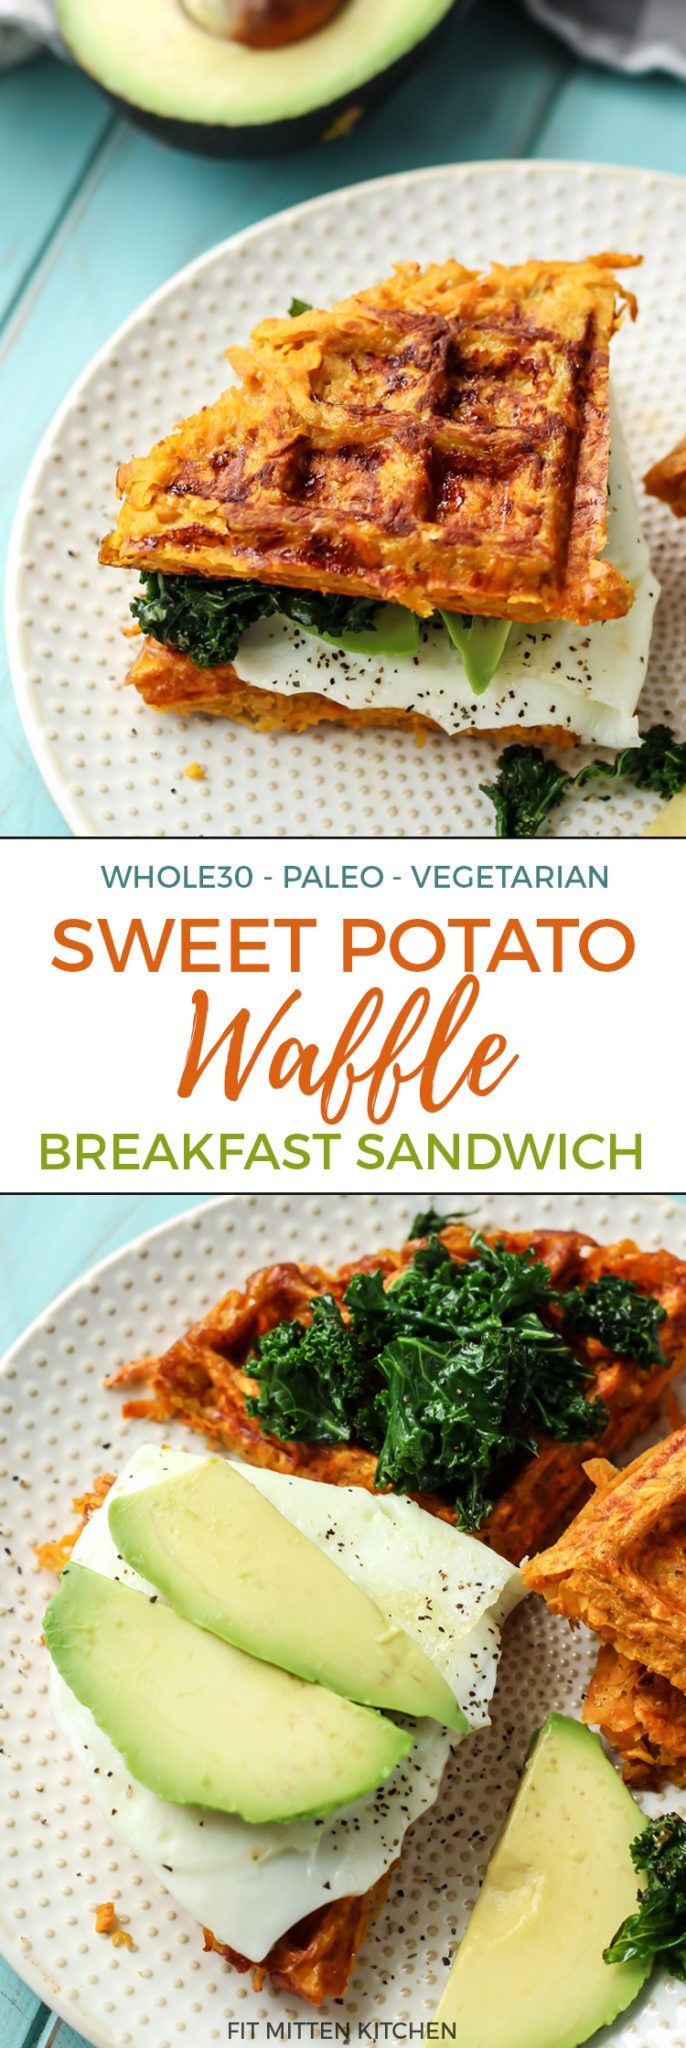 Paleo Sweet Potato Waffle Breakfast Sandwich. Simple ingredients and so good! You are going to want to try this! And its